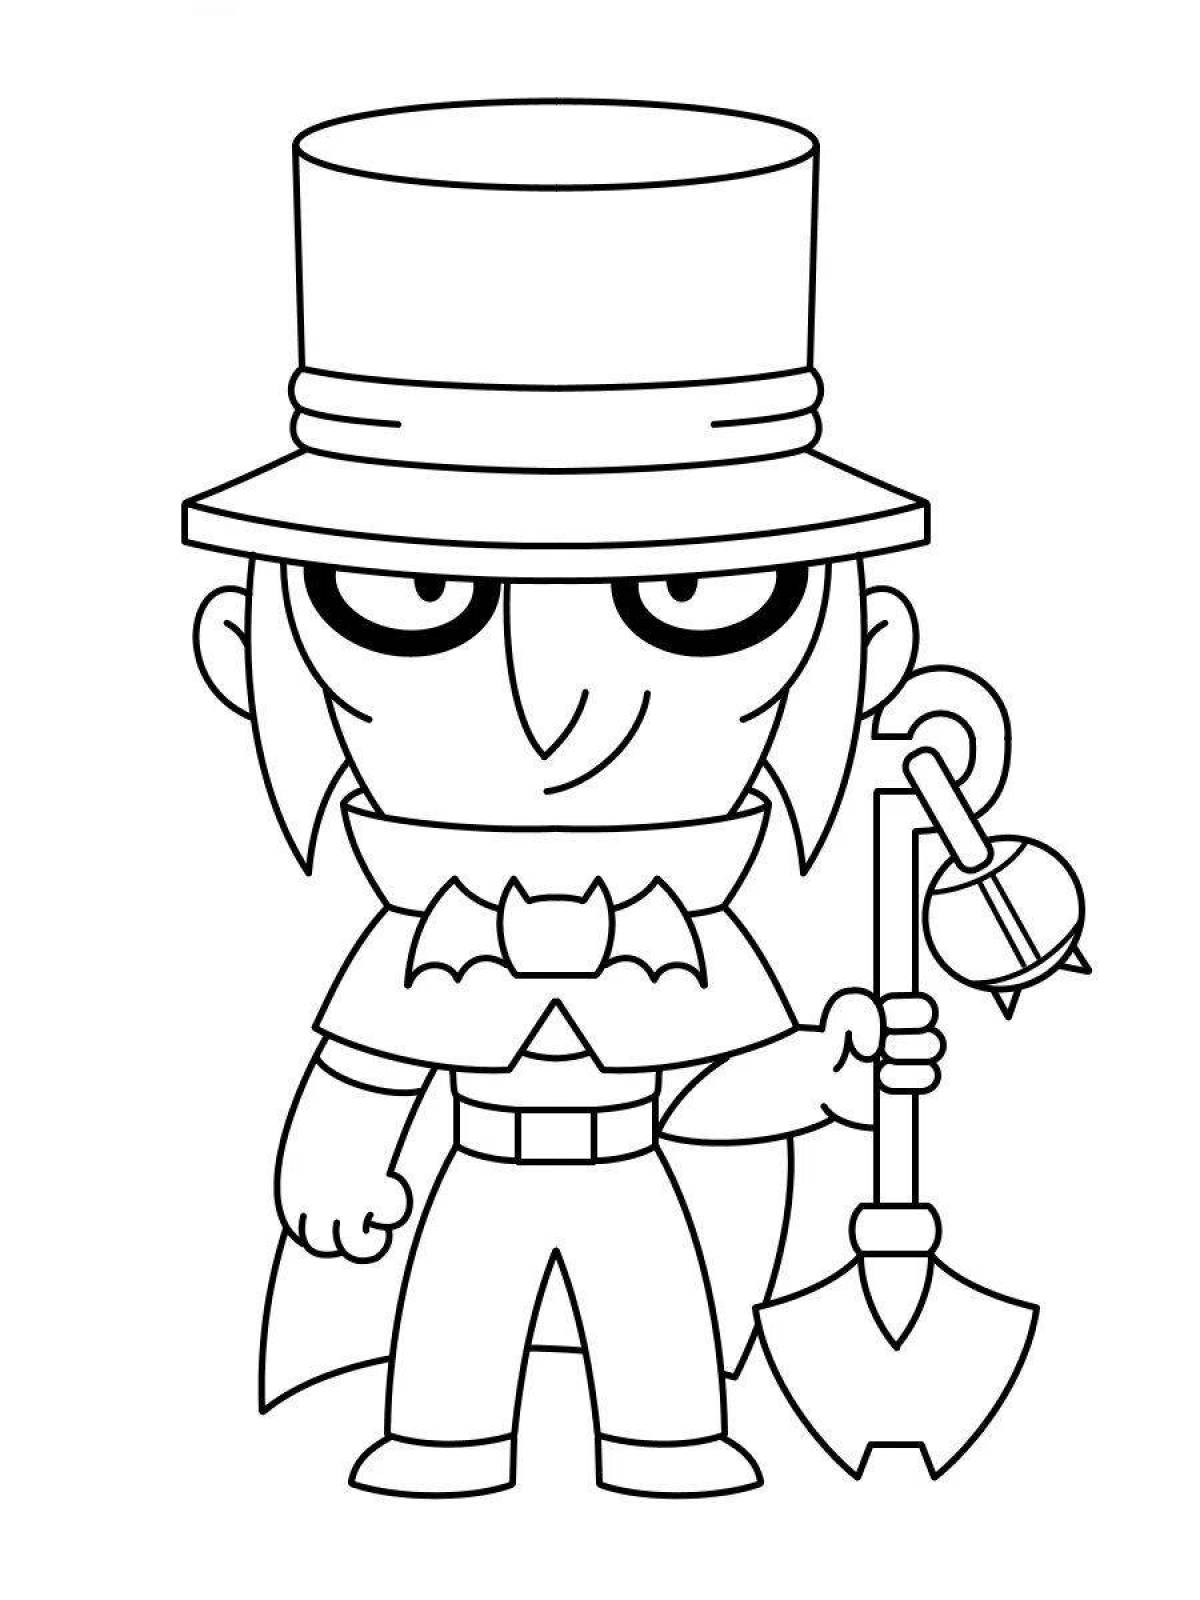 Exquisite dynamike coloring book